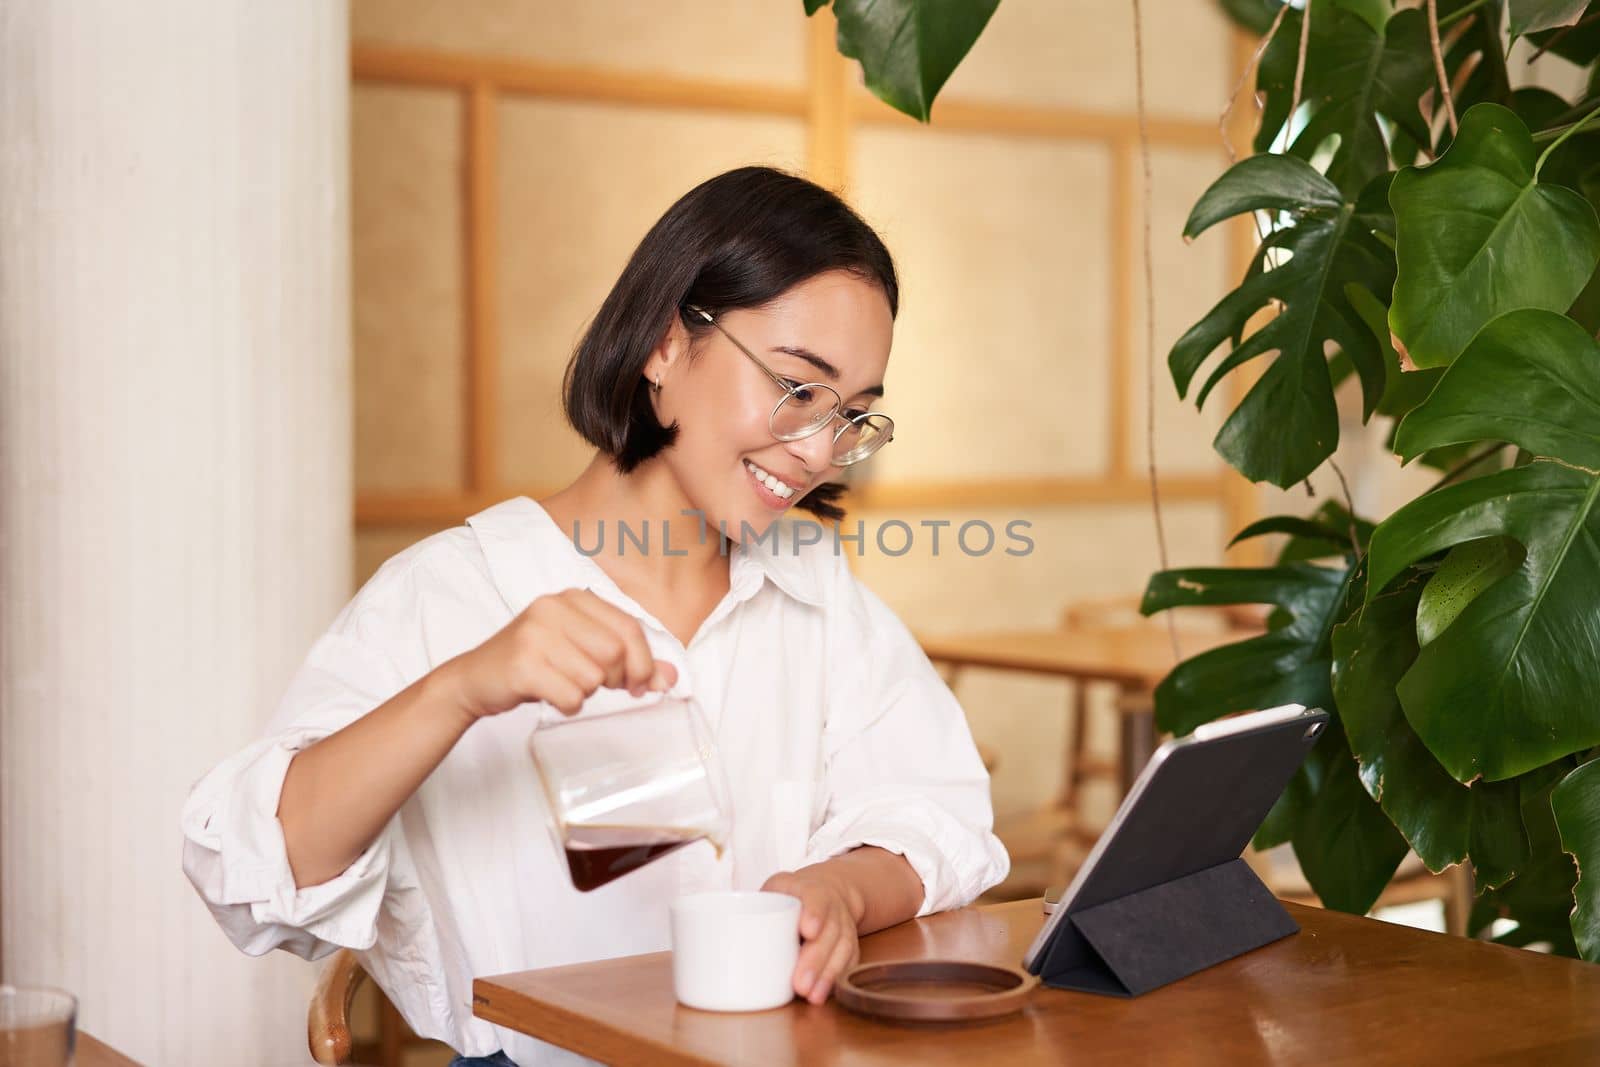 Freelance and remote workers. Smiling young woman pouring coffee in a cup, sitting in cafe and looking at digital tablet.